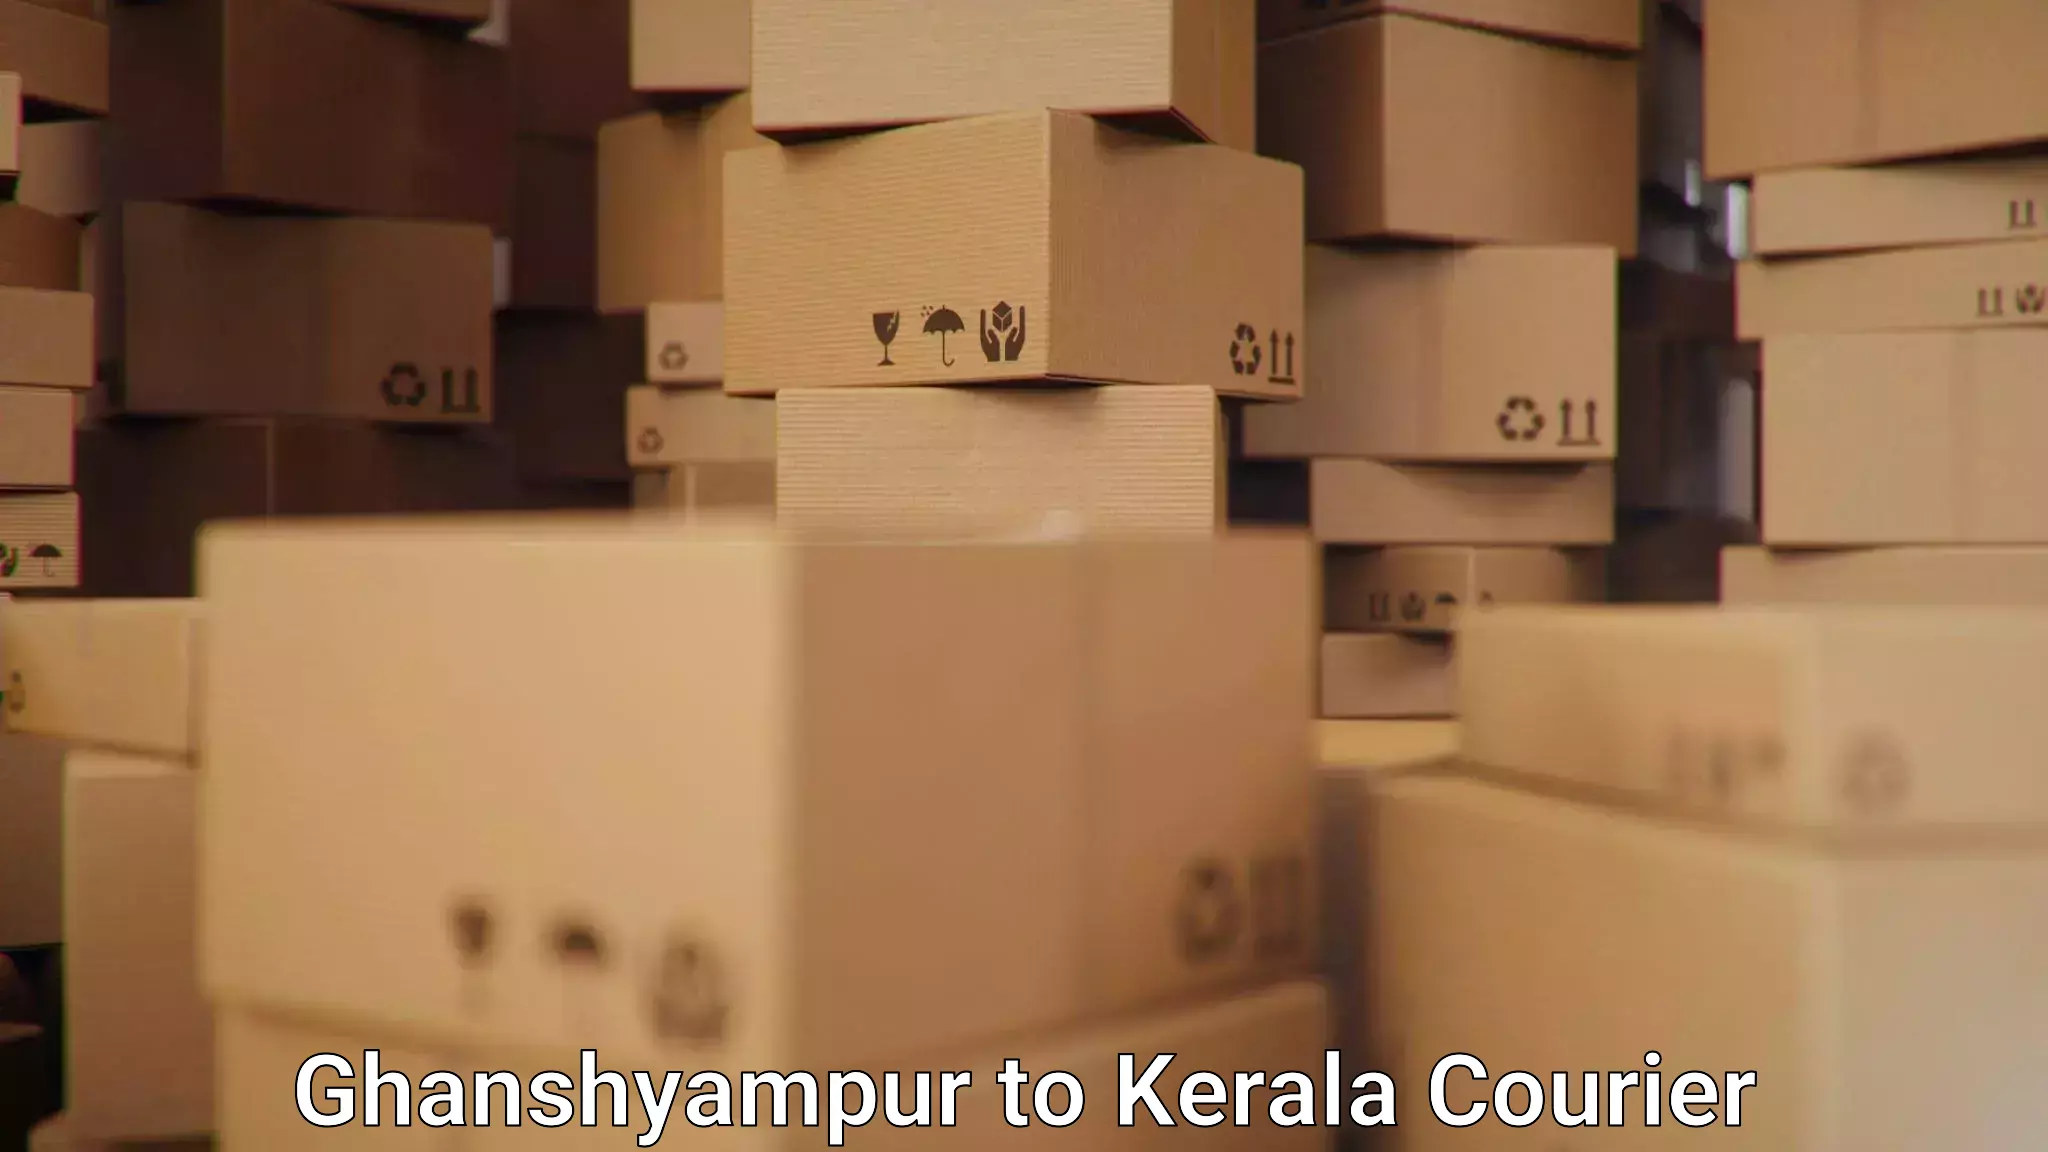 Courier service innovation Ghanshyampur to Kodungallur